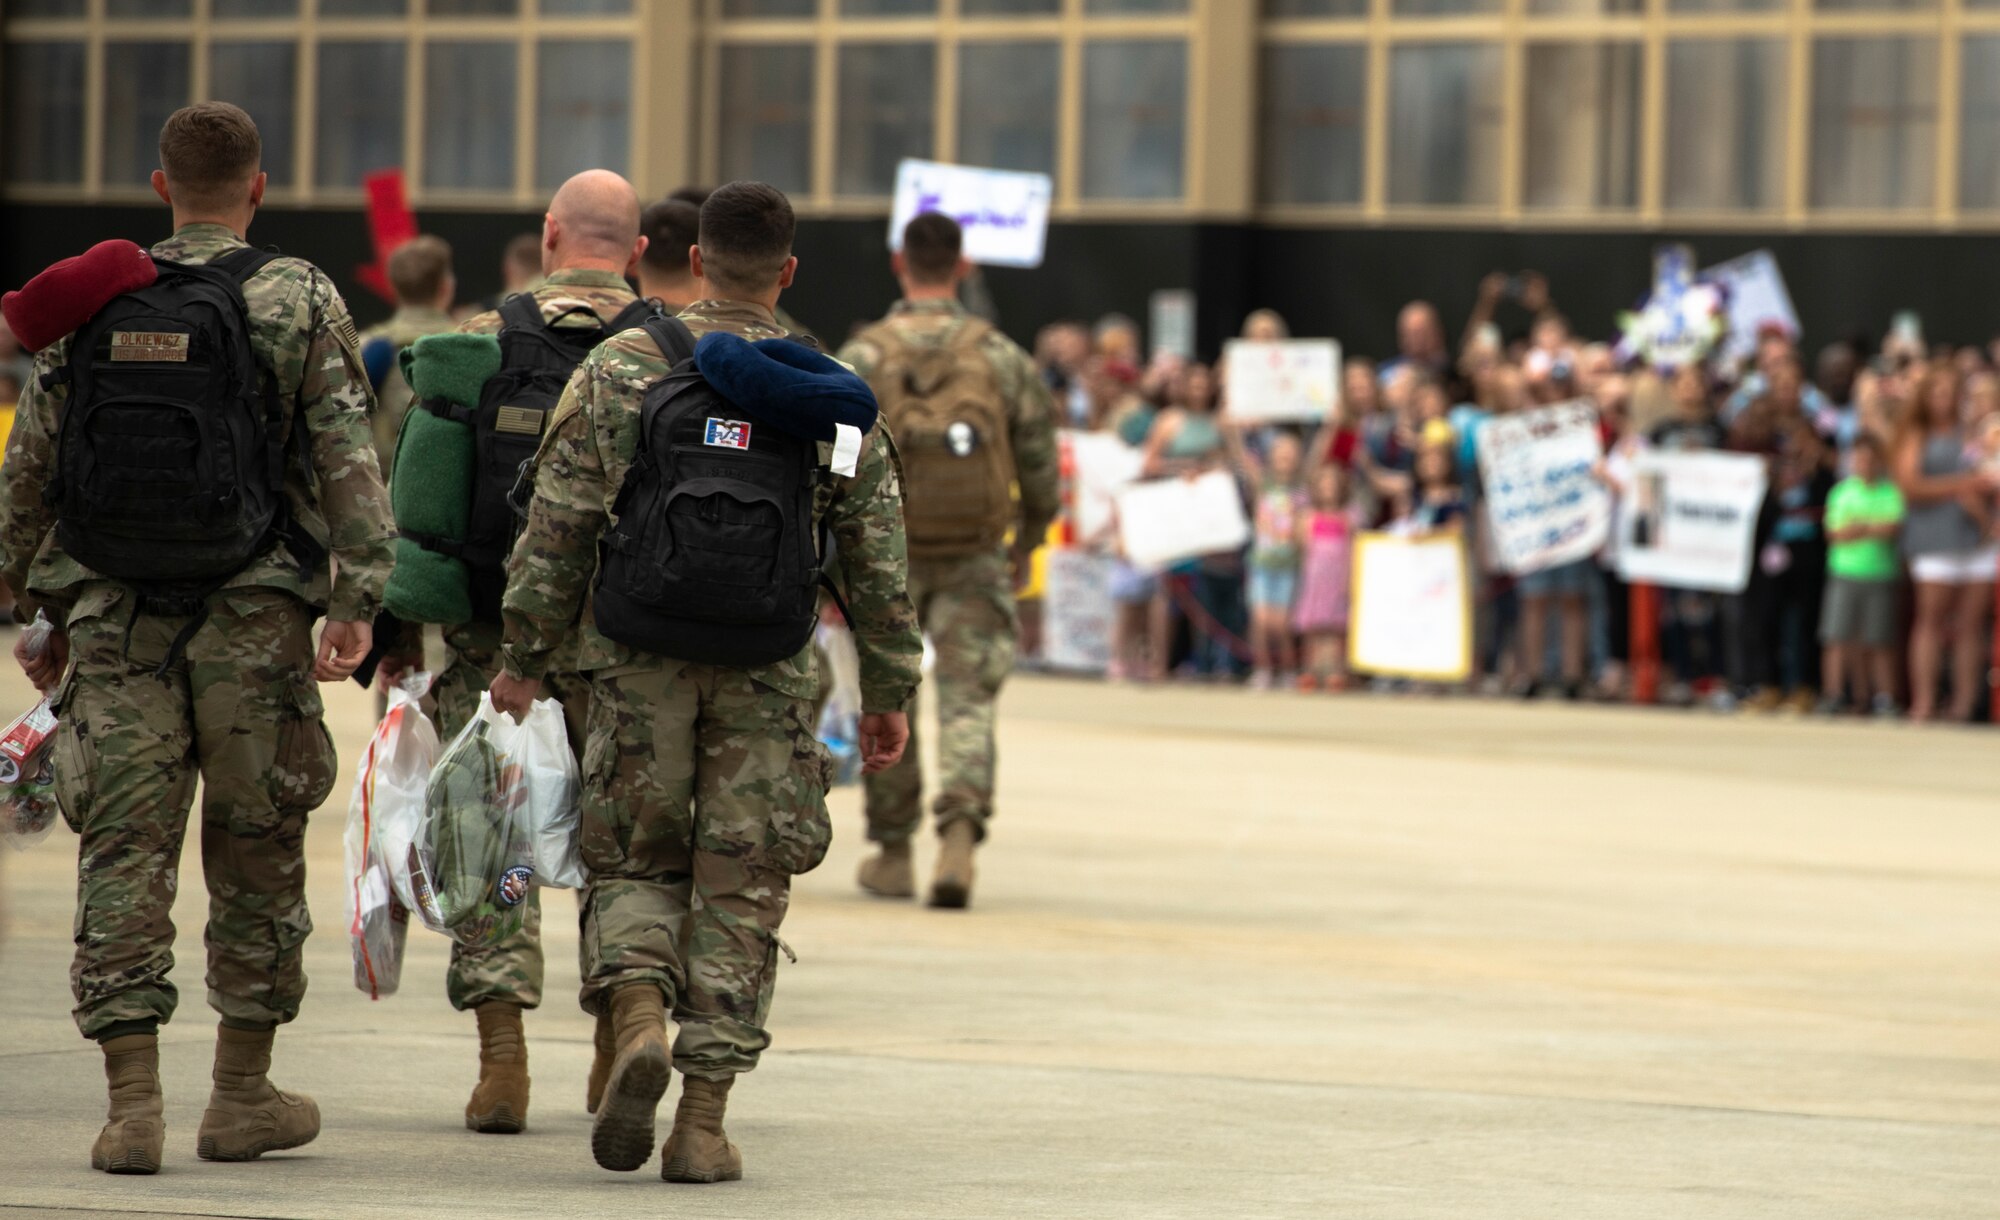 U.S. Airmen assigned to the 55th Fighter Squadron and 20th Aircraft Maintenance Squadron, 55th Aircraft Maintenance Unit as well as supporting units return from a deployment to an undisclosed location in Southwest Asia to Shaw Air Force Base, S.C., May 4, 2019.